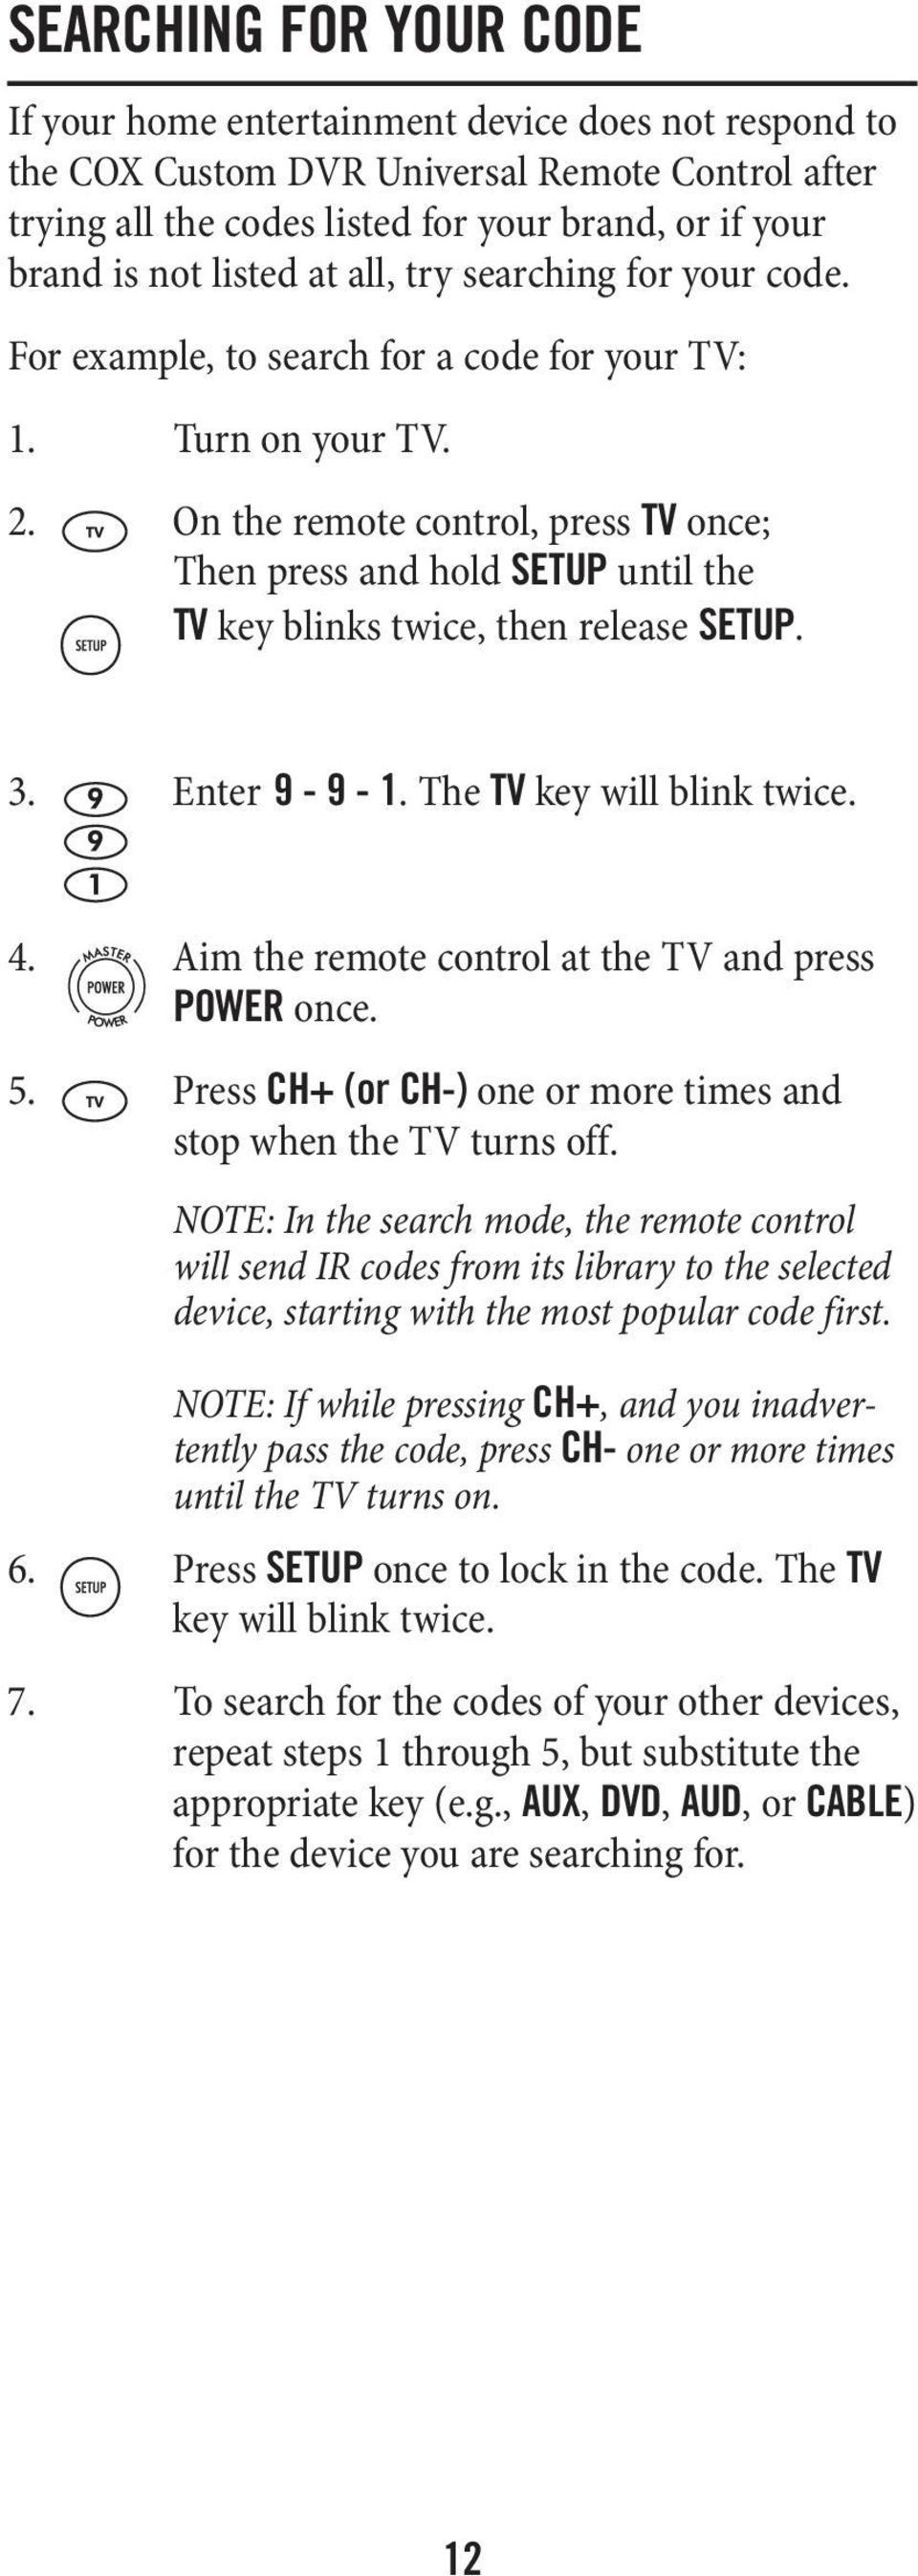 On the remote control, press TV once; Then press and hold SETUP until the TV key blinks twice, then release SETUP. 3. Enter 9-9 - 1. The TV key will blink twice. 4.